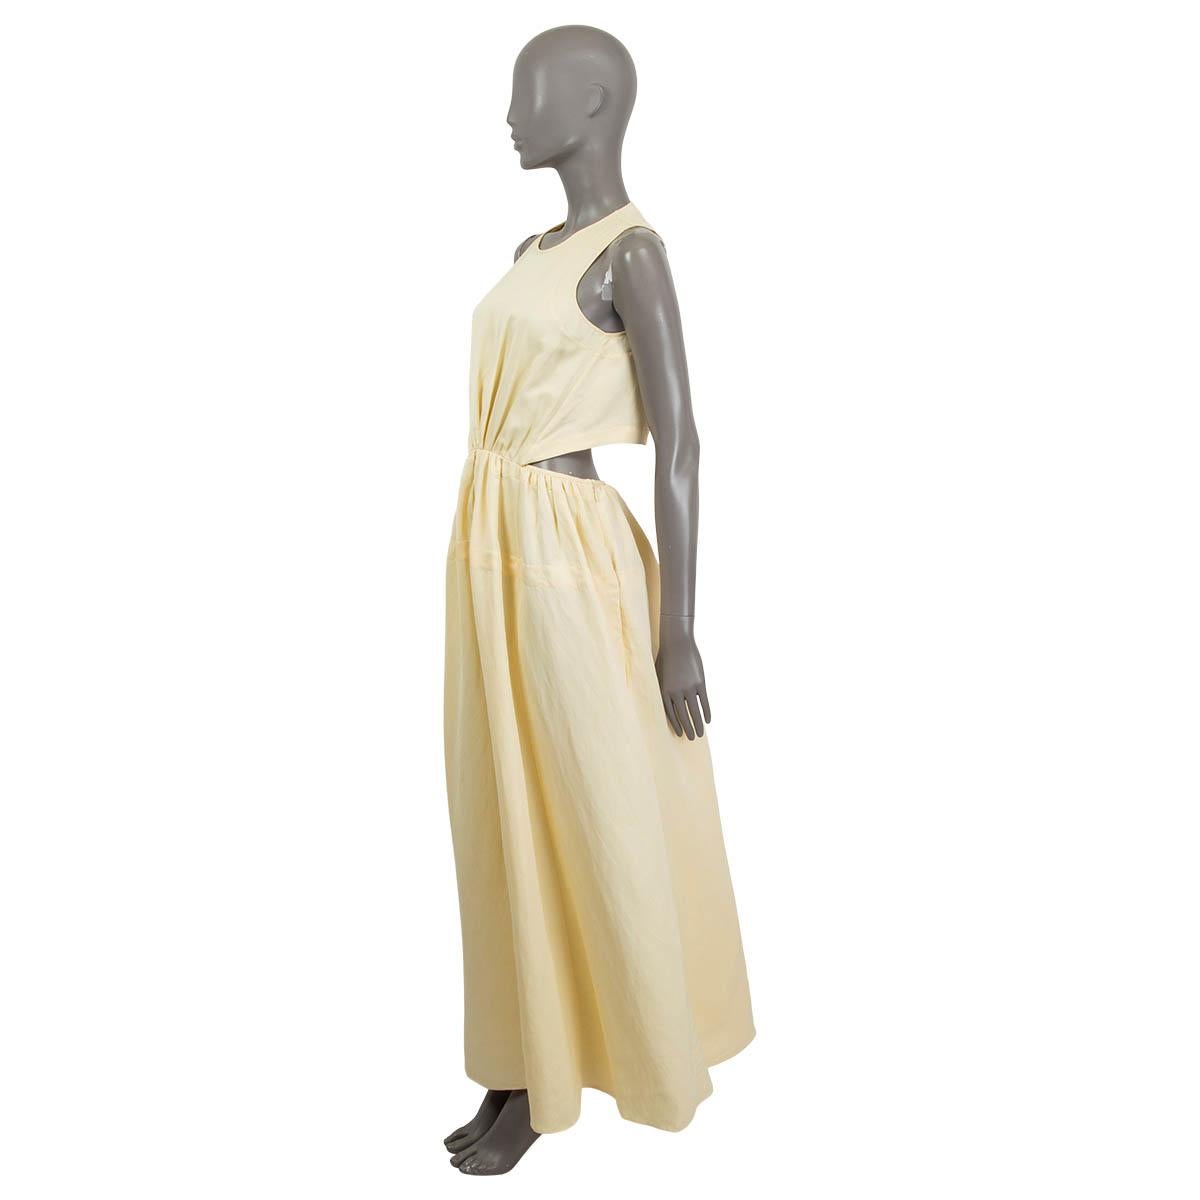 100% authentic Jil Sander sleeveless cut out maxi dress in vanilla viscose (74%) and linen (26%). Opens with a concealed zipper and a hook at the side and a button at the back. Unlined. Shows some stains and scratches of wearing at the hemline,